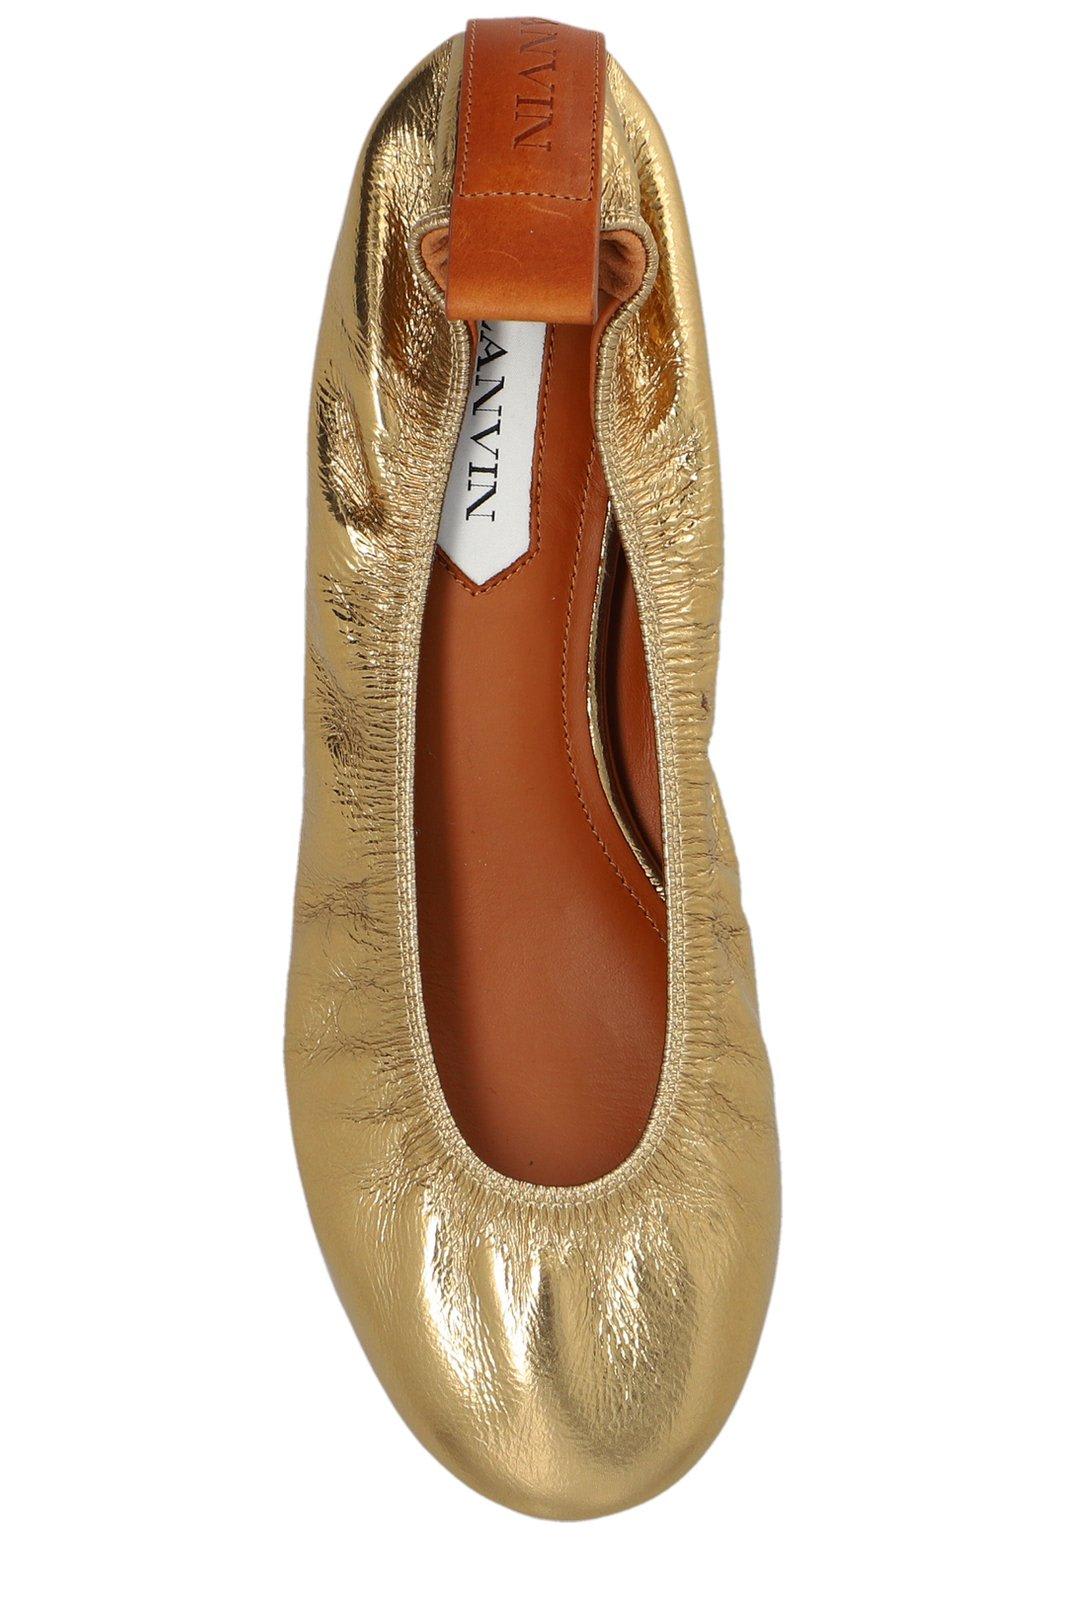 Shop Lanvin Ruched Detail Metallic Ballerina Shoes In Silver